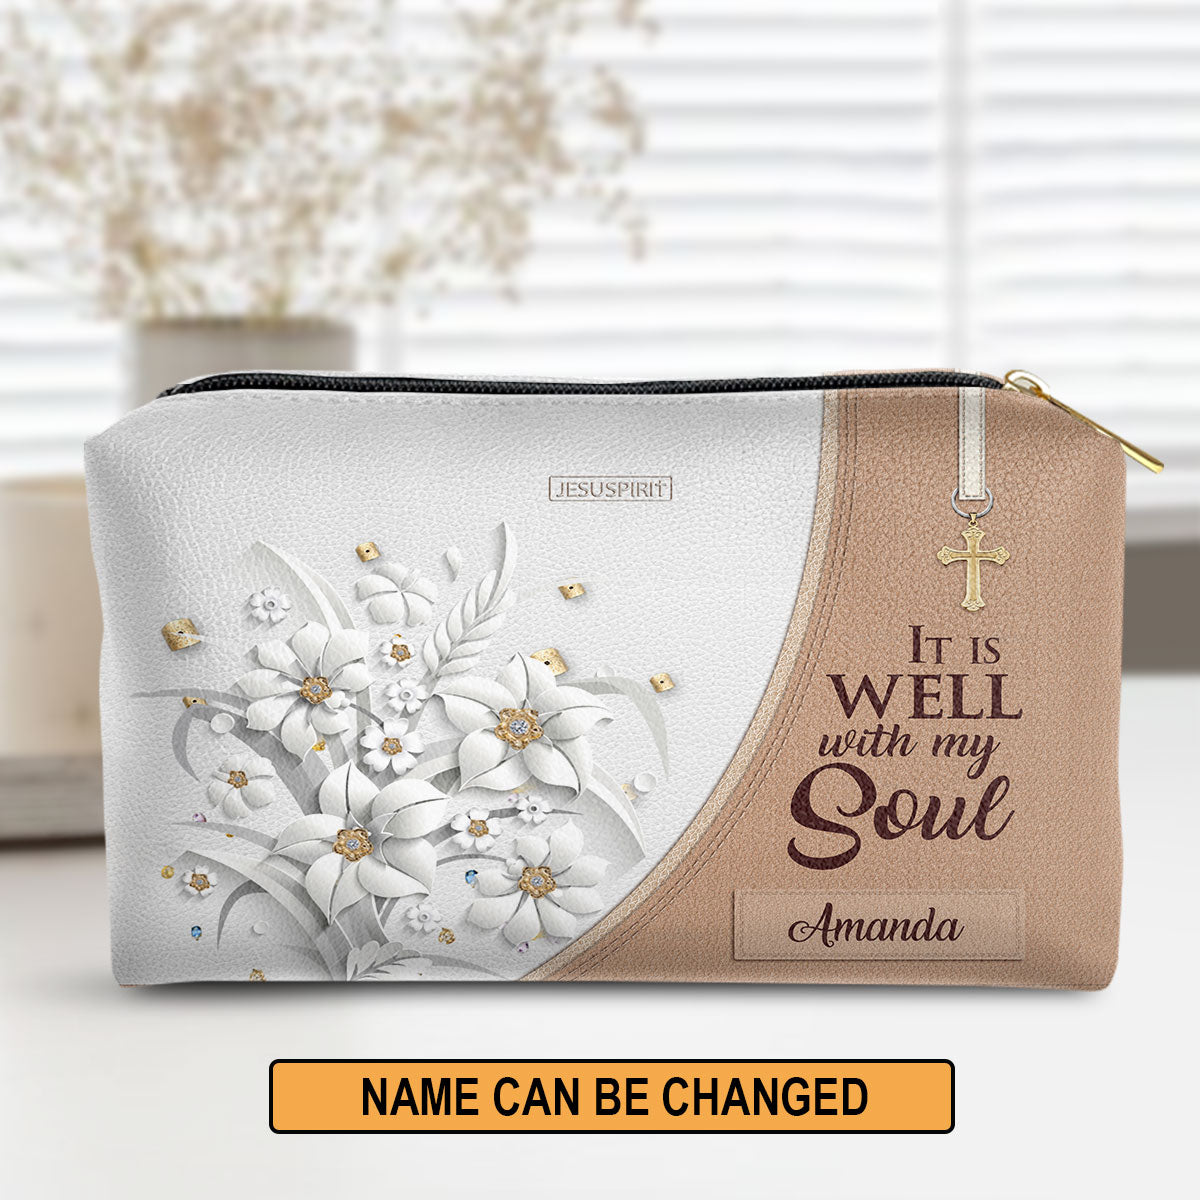 It Is Well With My Soul Personalized Leather Pouch With Zipper - Meaningful Gift For Spiritual Members